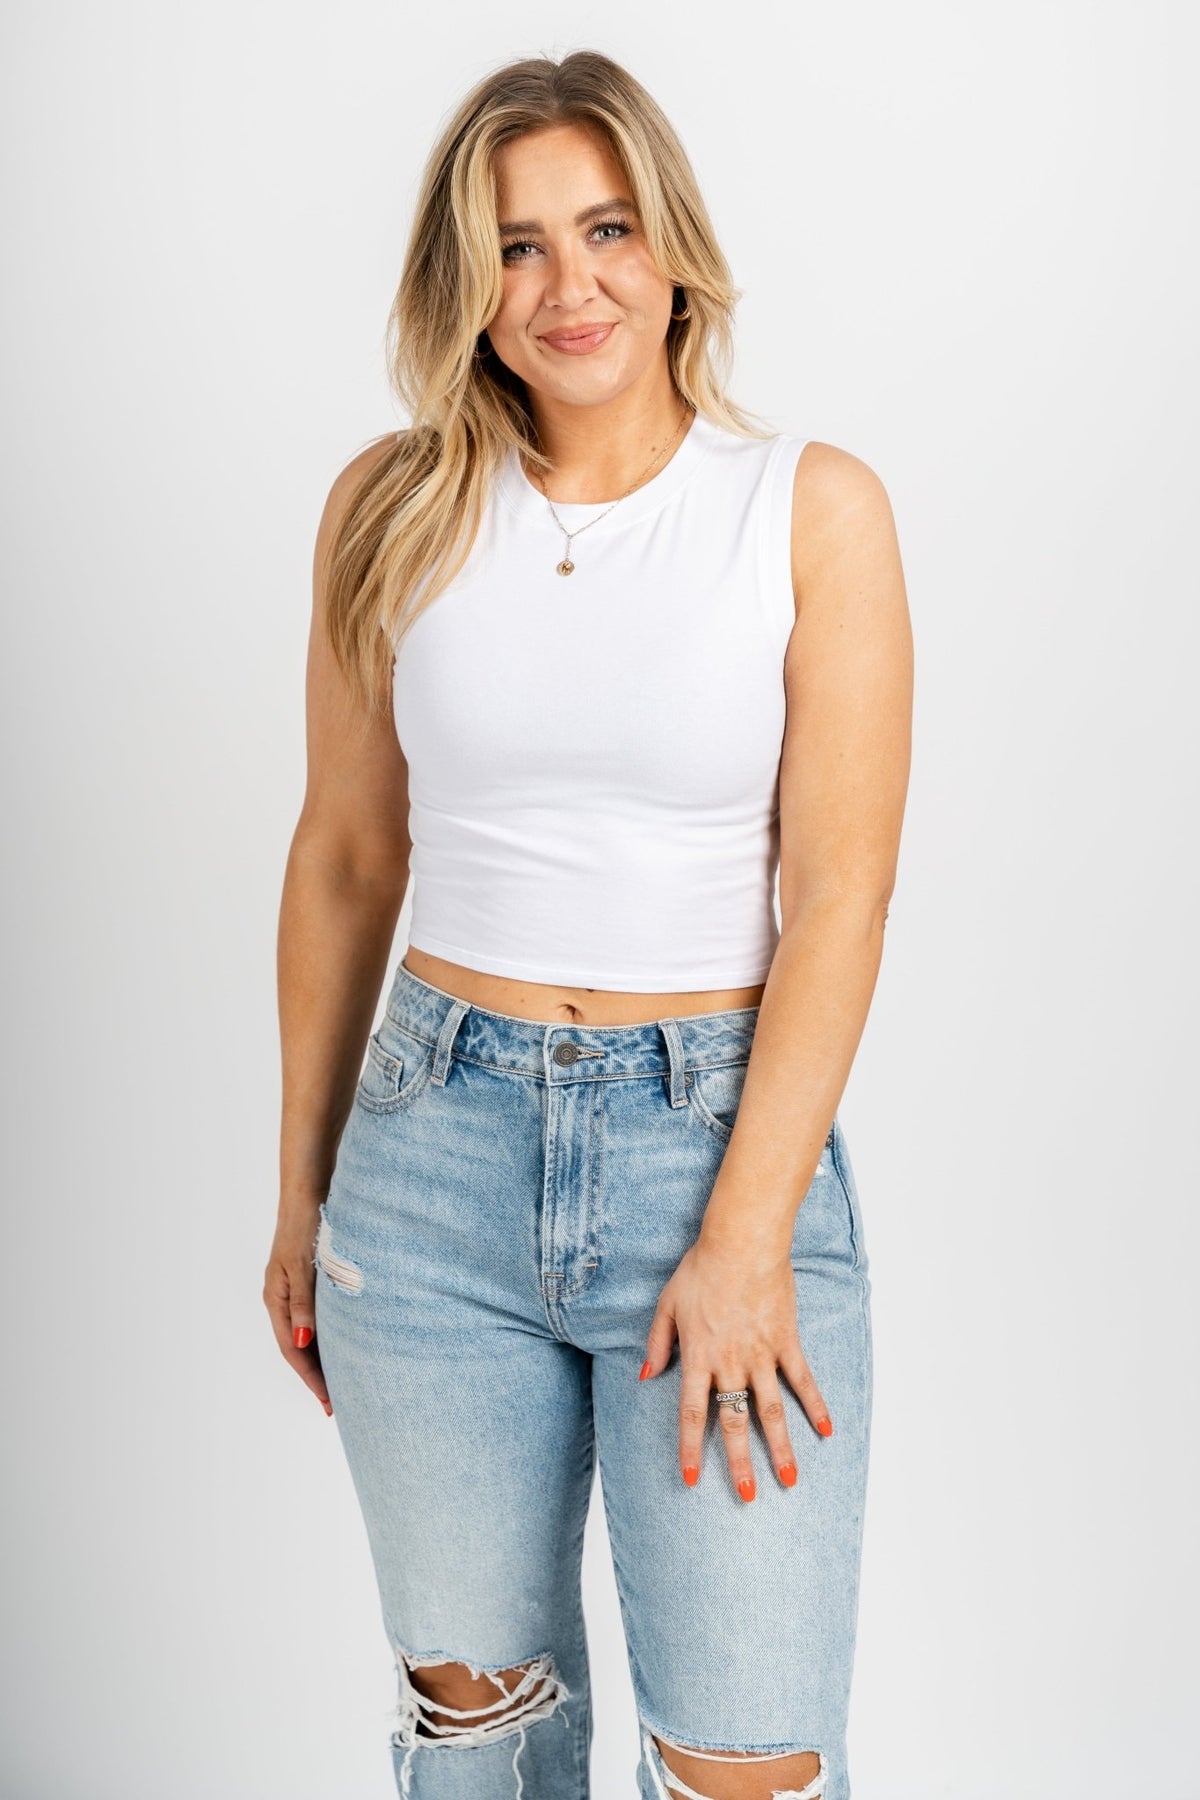 Z Supply Ivy tank top white - Z Supply Tank Top - Z Supply Tops, Dresses, Tanks, Tees, Cardigans, Joggers and Loungewear at Lush Fashion Lounge